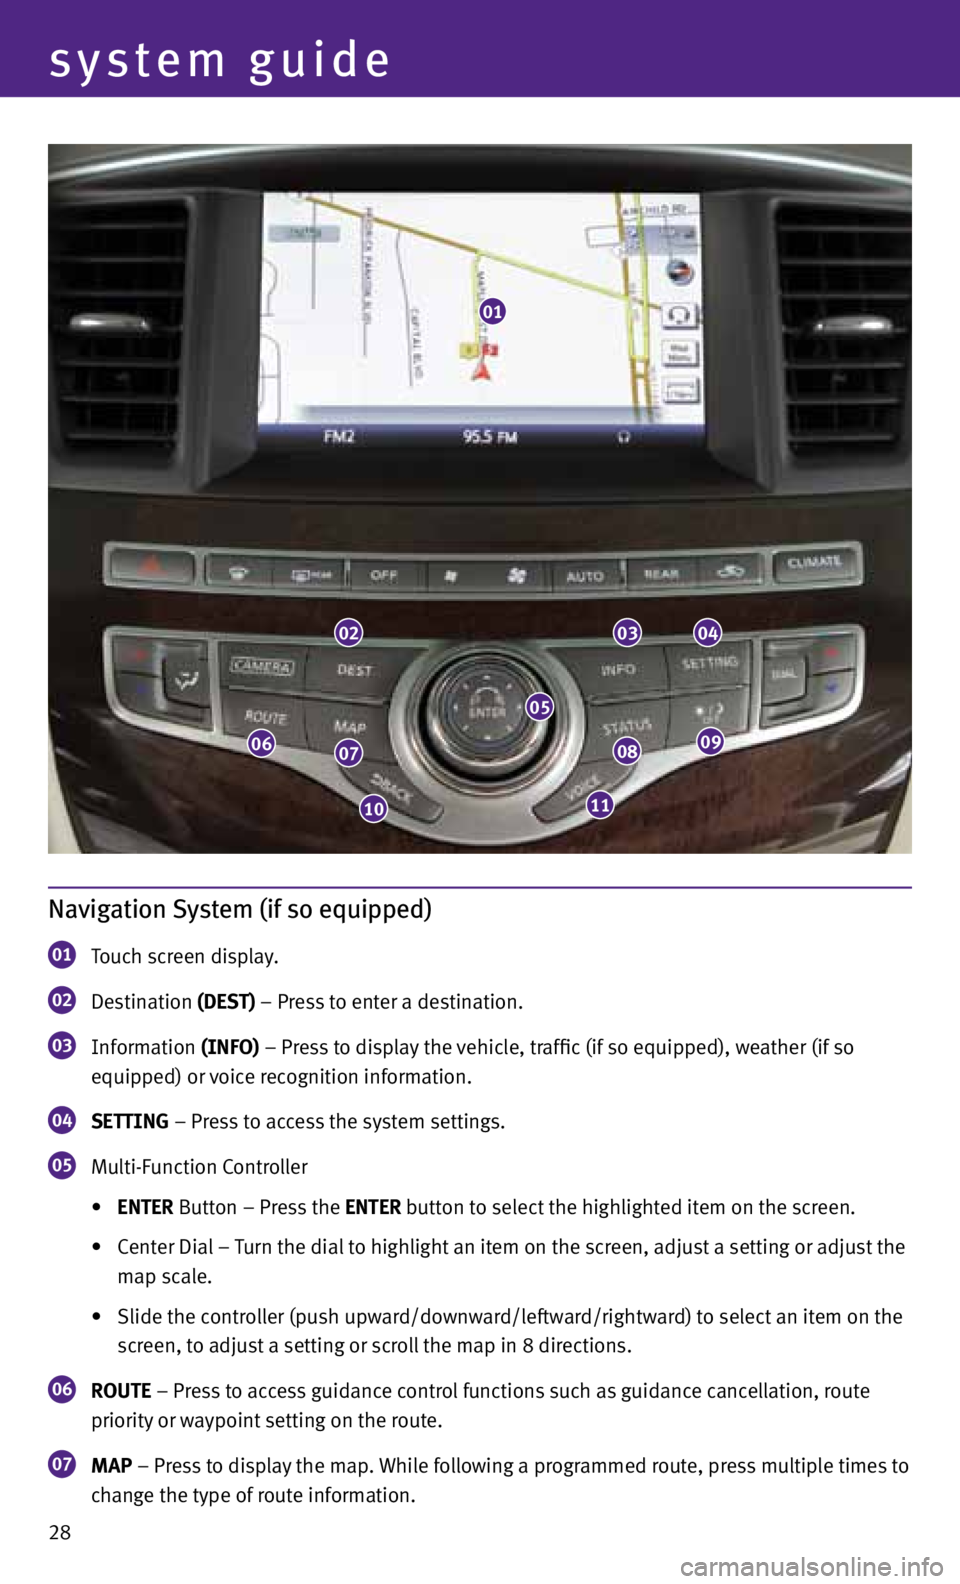 INFINITI JX 2013  Quick Reference Guide 28
system guide
Navigation System (if so equipped)
01  Touch screen display.
 
02  Destination 
(DEST) – Press to enter a destination.  
03  Information 
(INFO) – Press to display the vehicle, tra